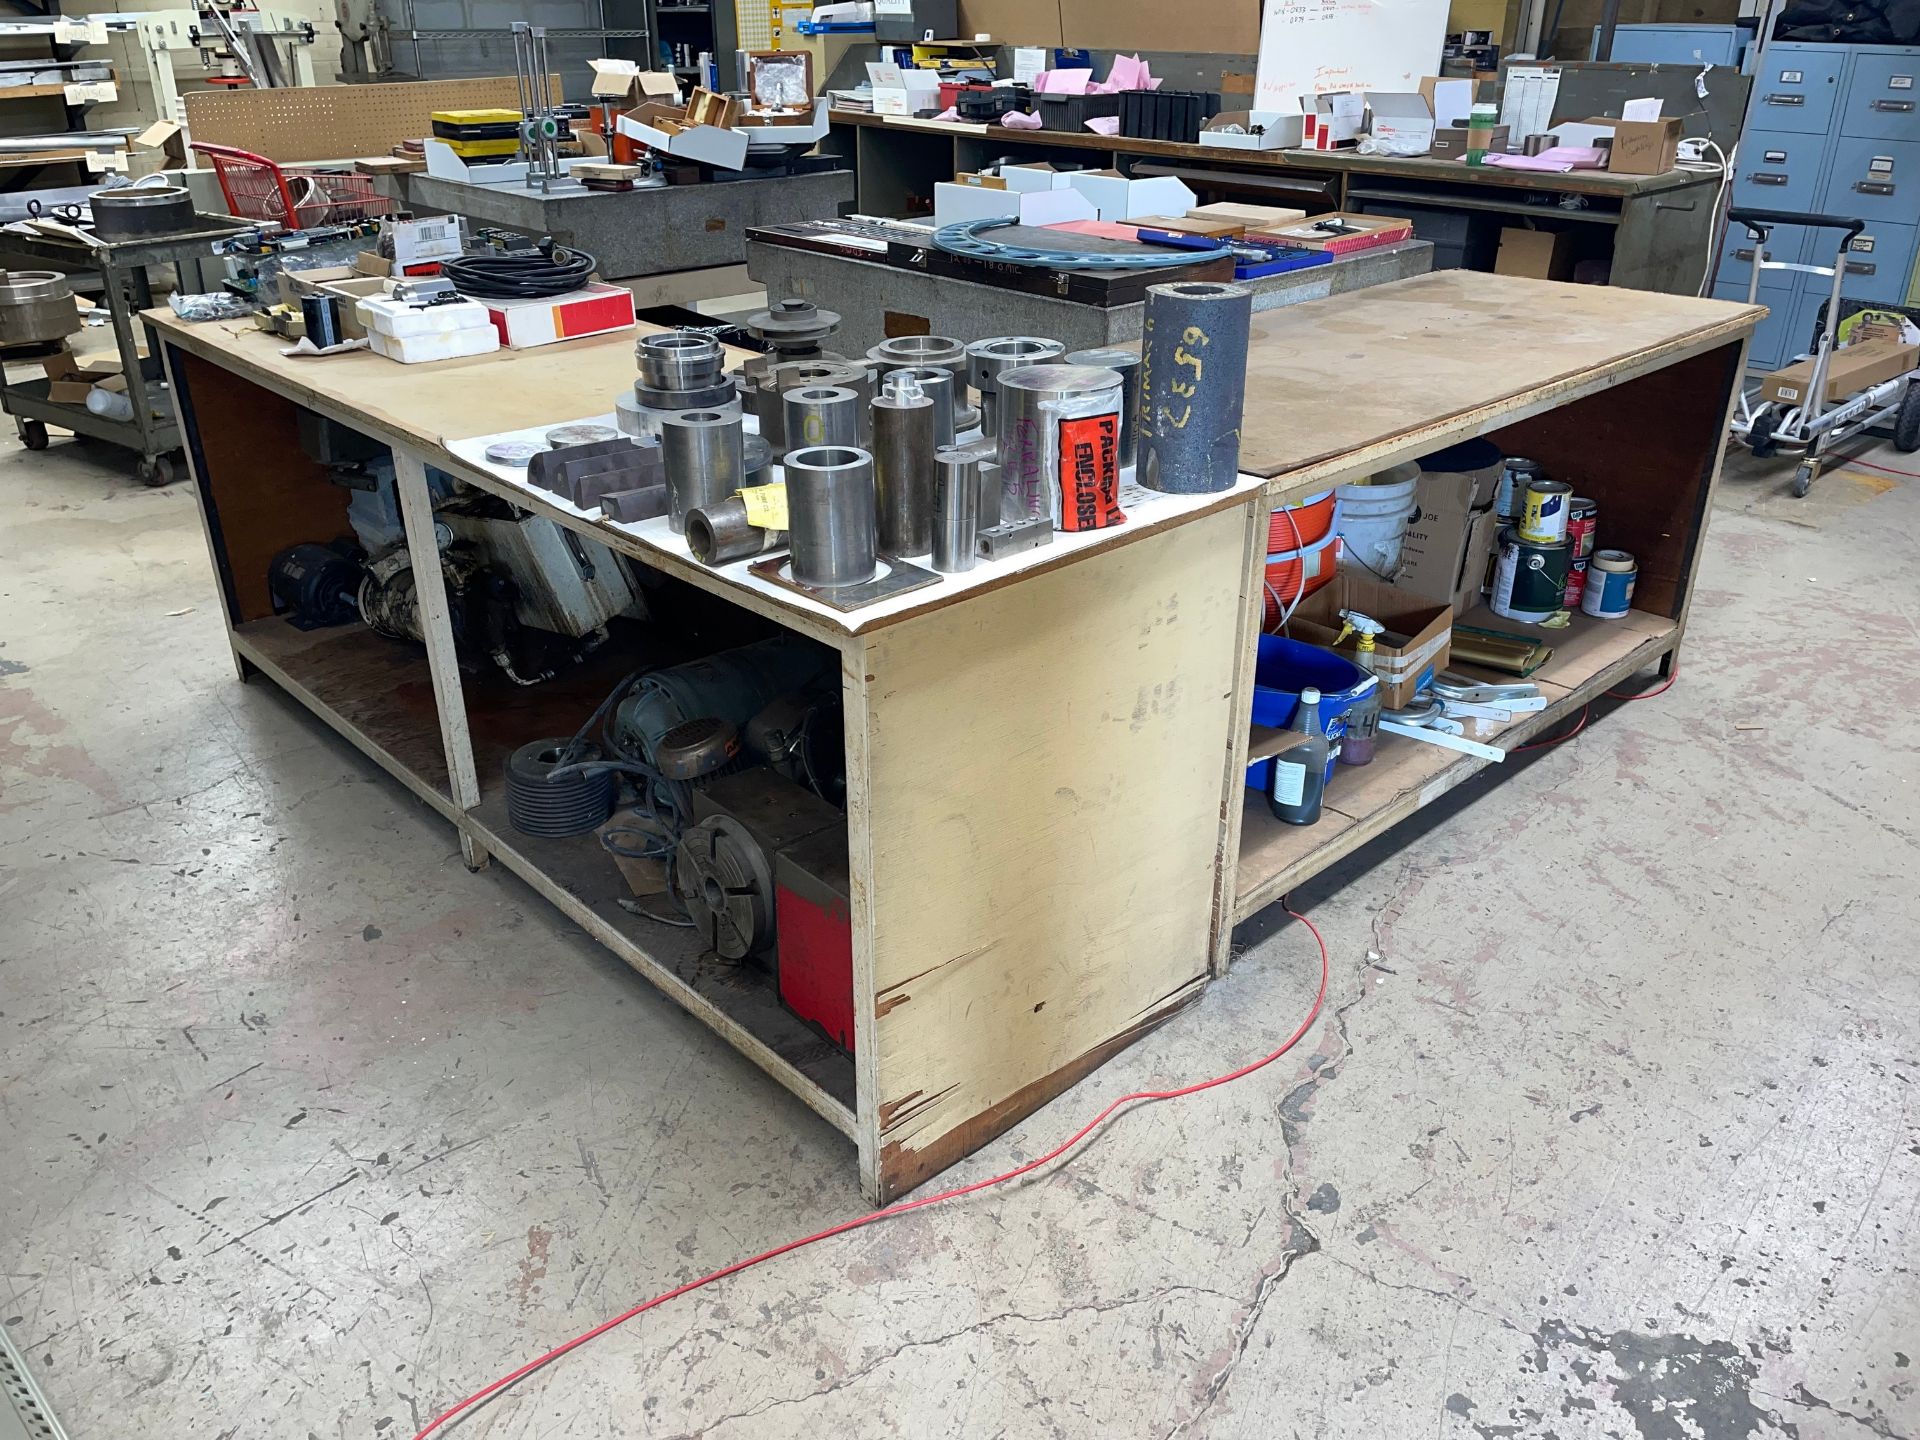 Lot with (3) Work Benches